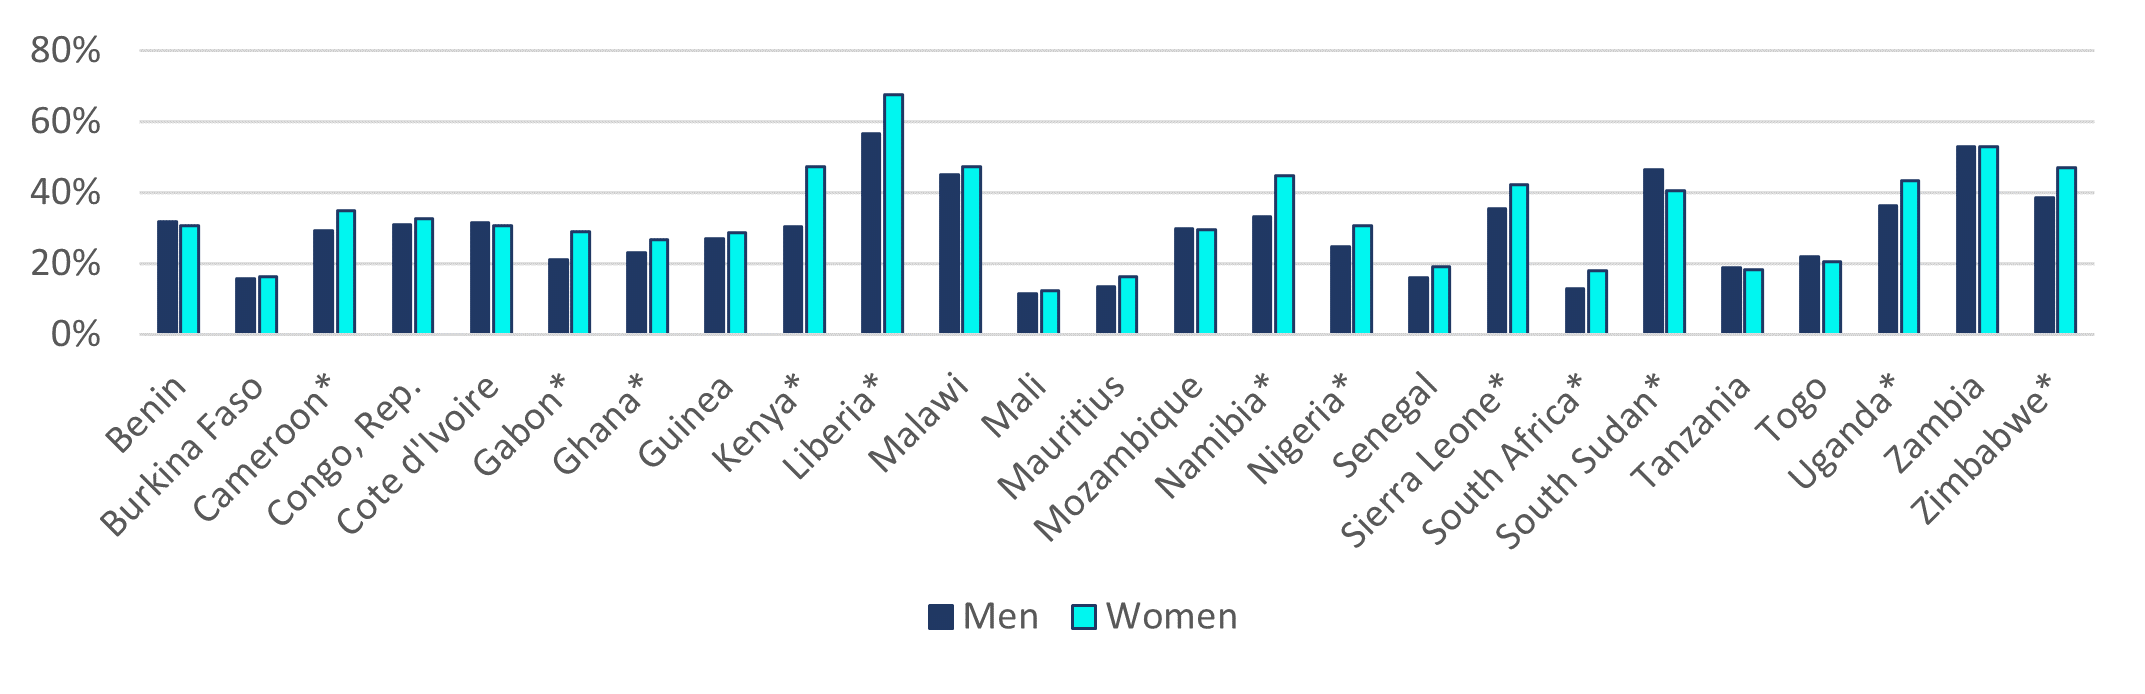 A bar chart showing igure 1: Share of adults most financially worried about school fees (%, age 15+) (Men vs. women)